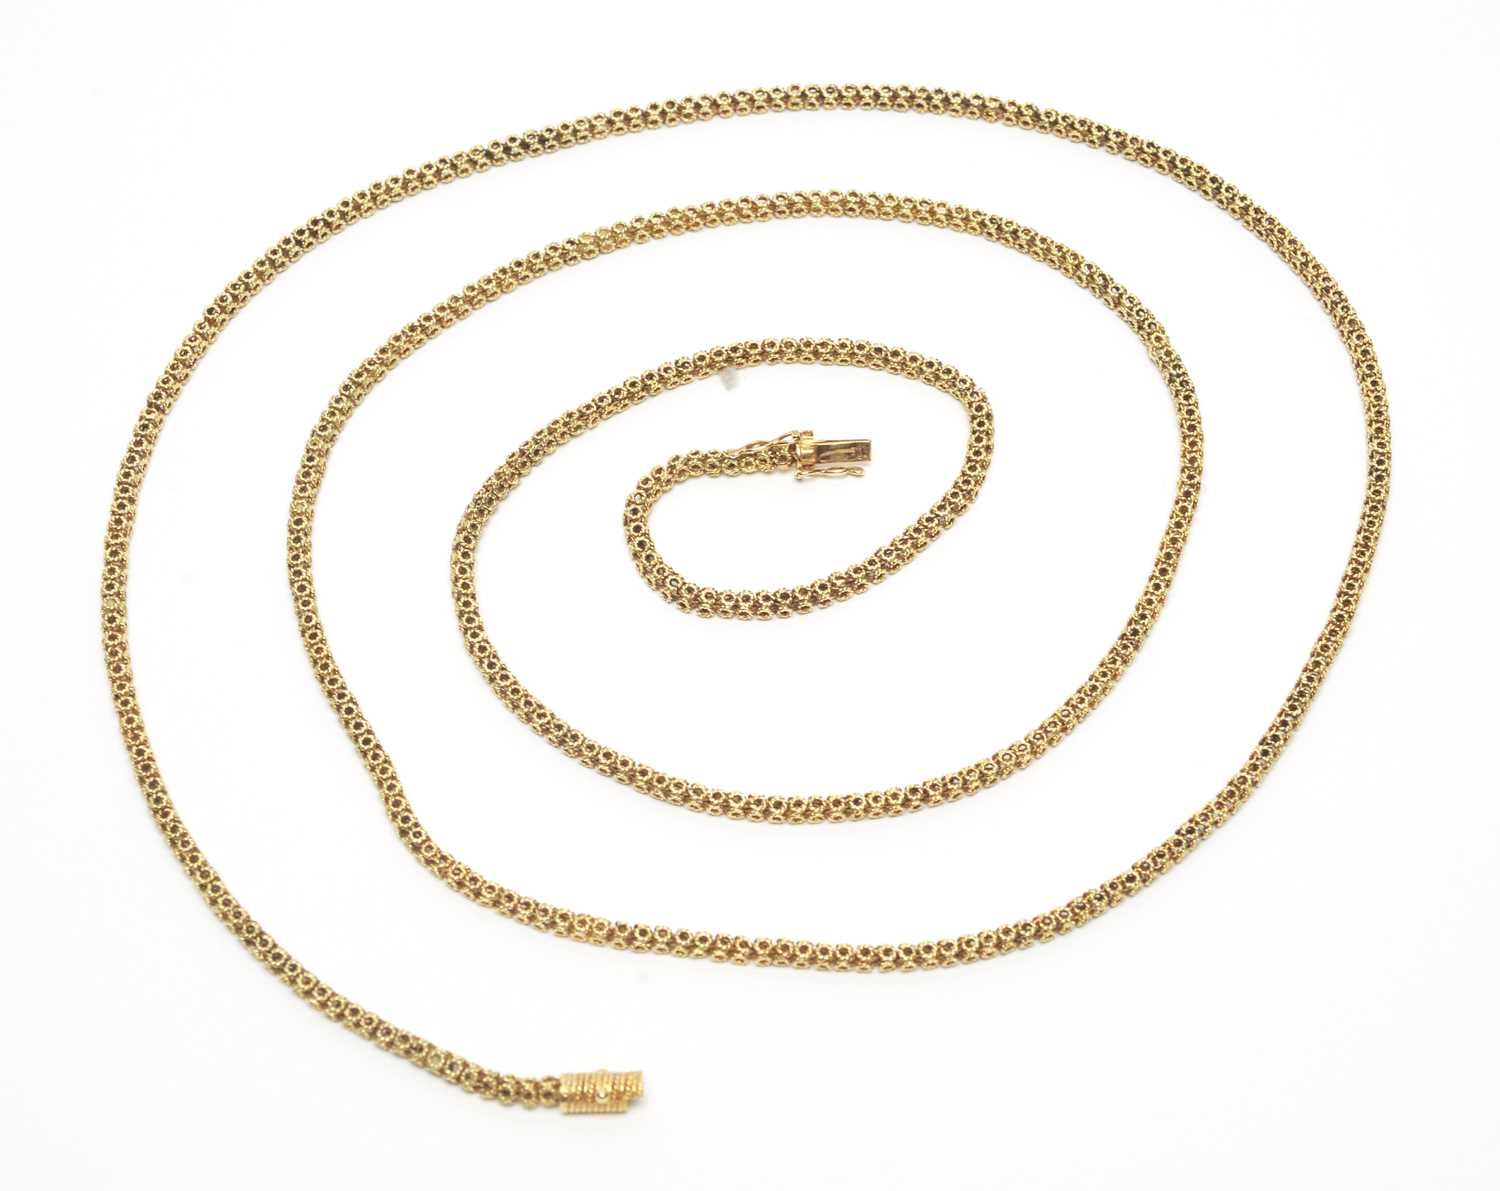 Lot 11 - A 14ct yellow gold necklace